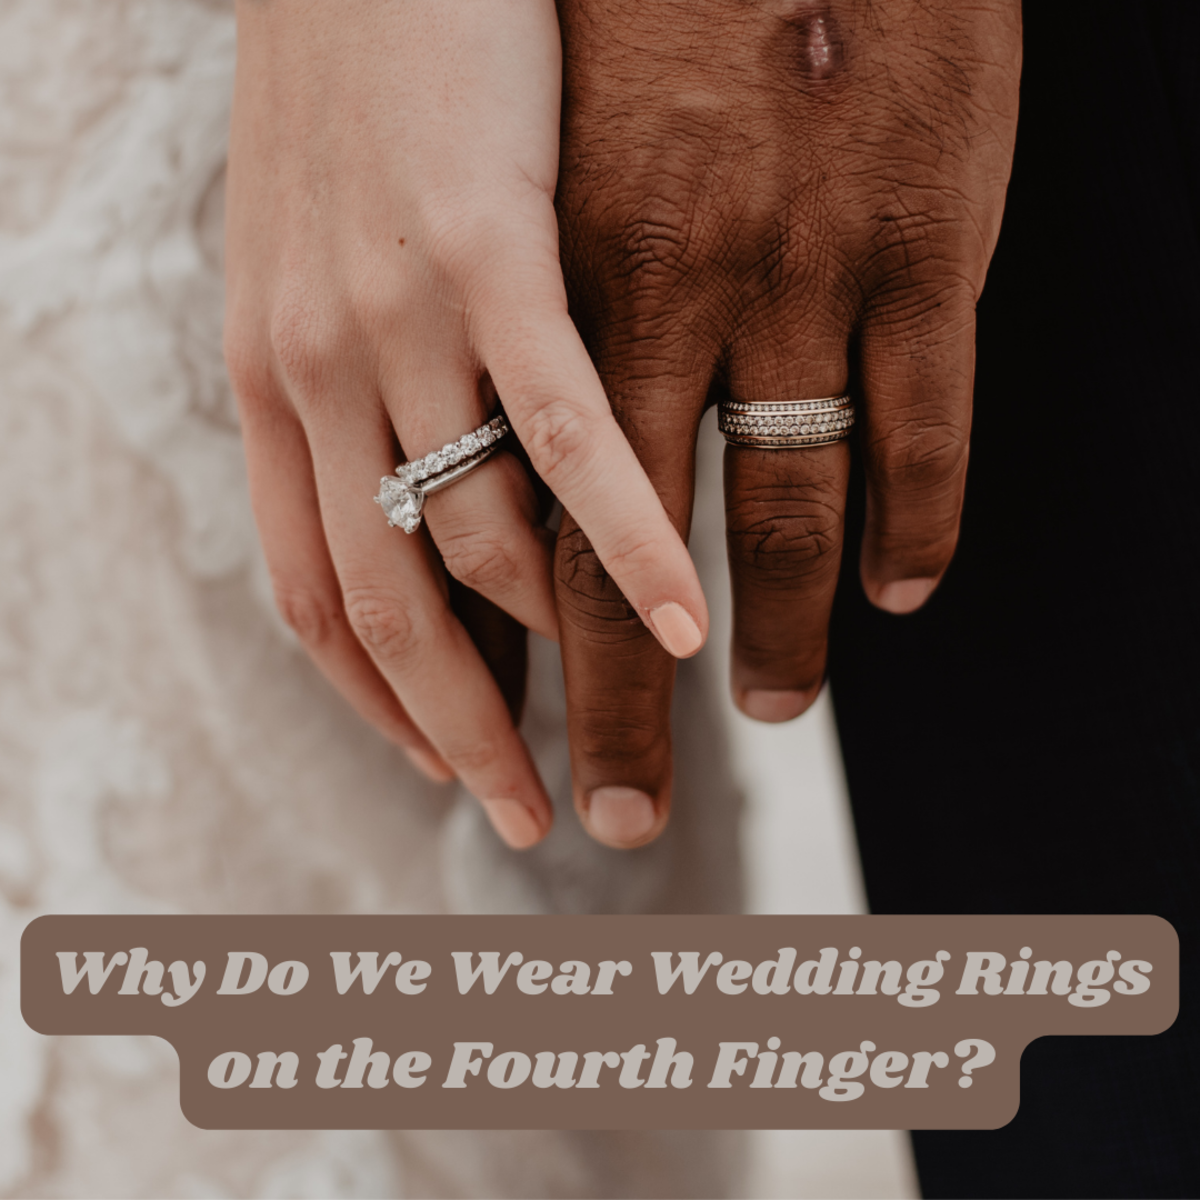 Why I Gave My Male Fiance An Engagement Ring